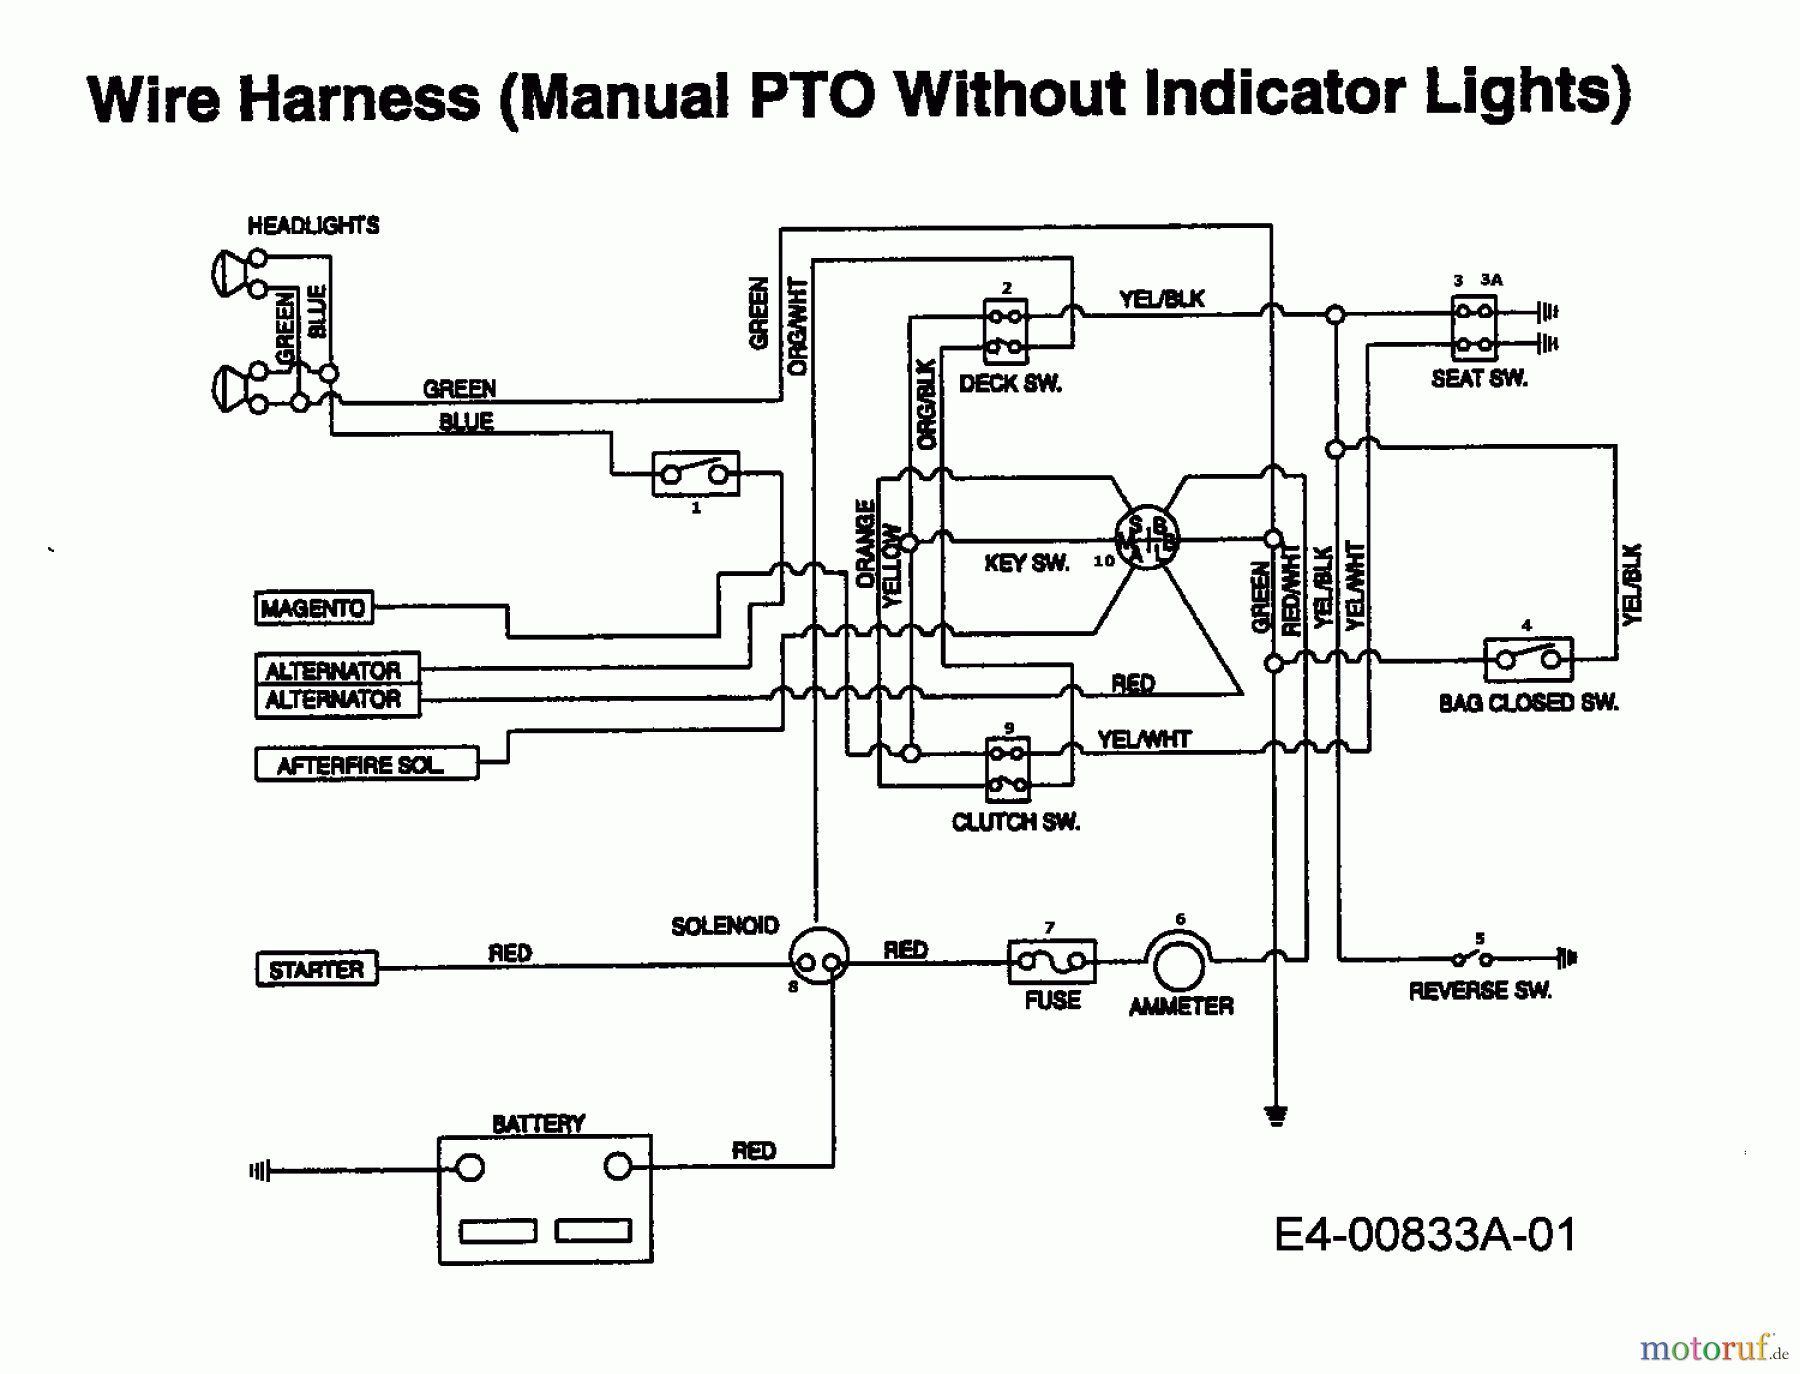  MTD Lawn tractors EH/160 13AF795N678  (1998) Wiring diagram without indicator lights